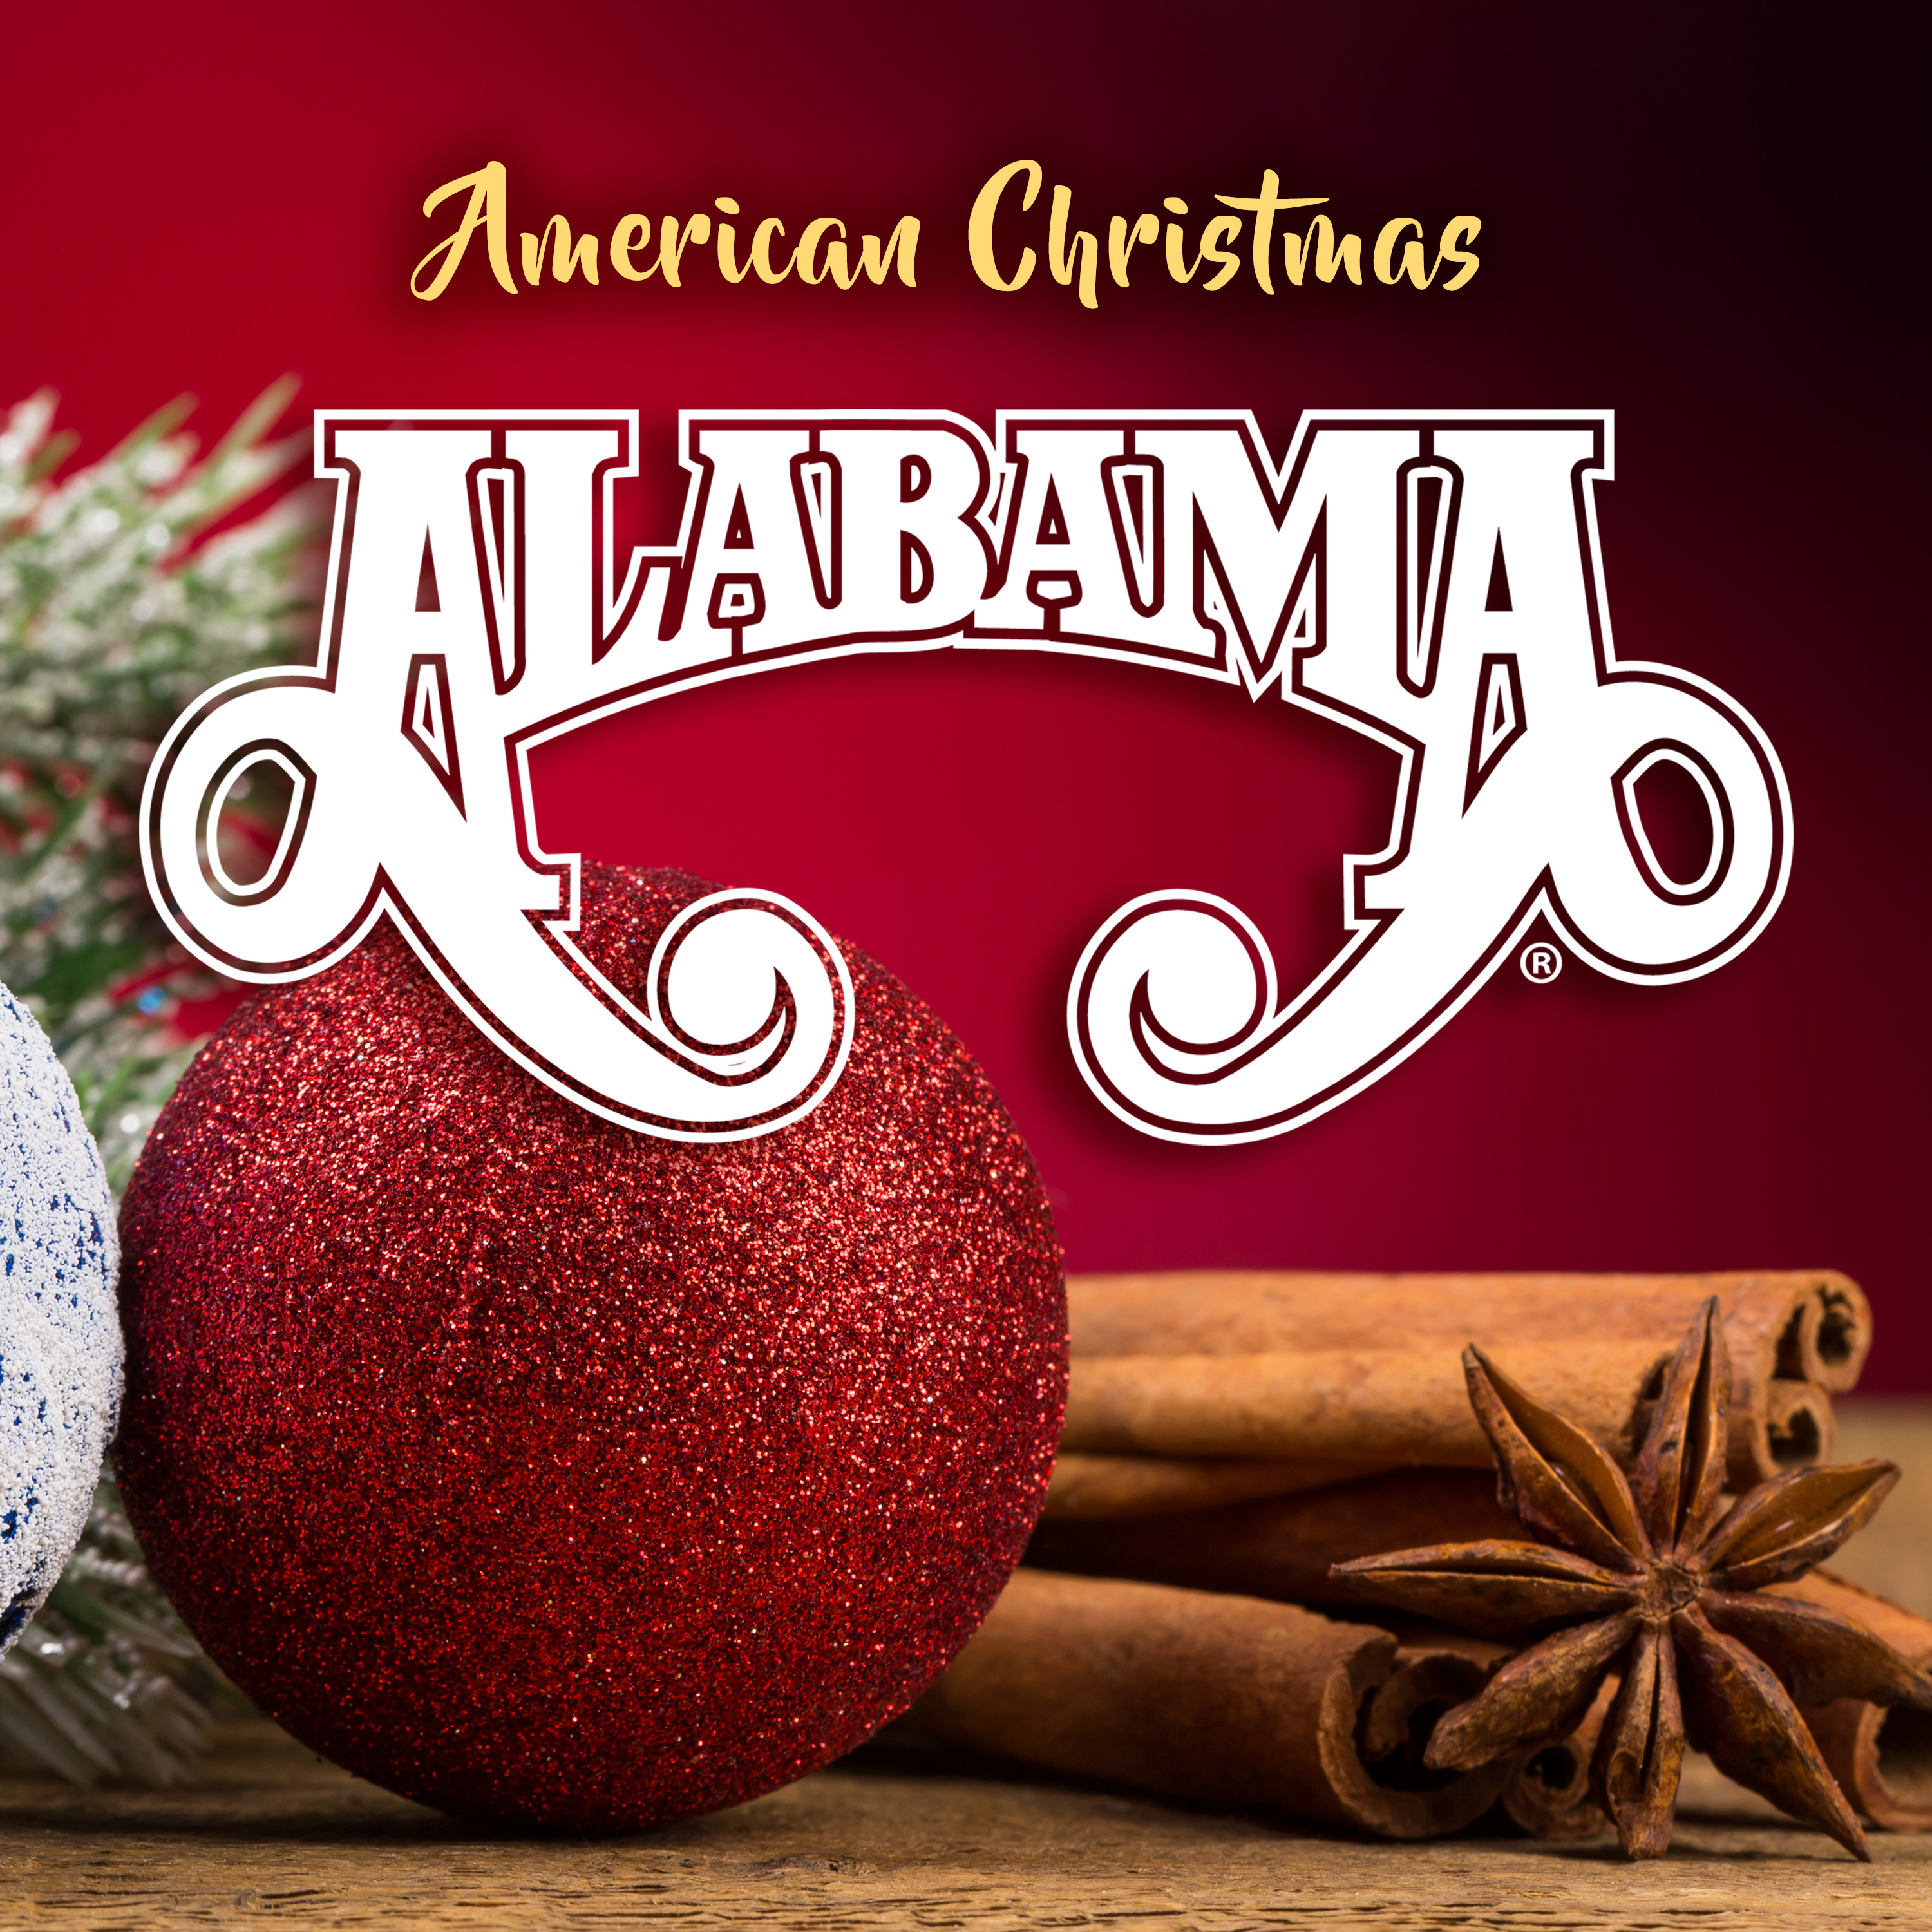 Alabama to Release First New Christmas Album in 21 Years Sounds Like